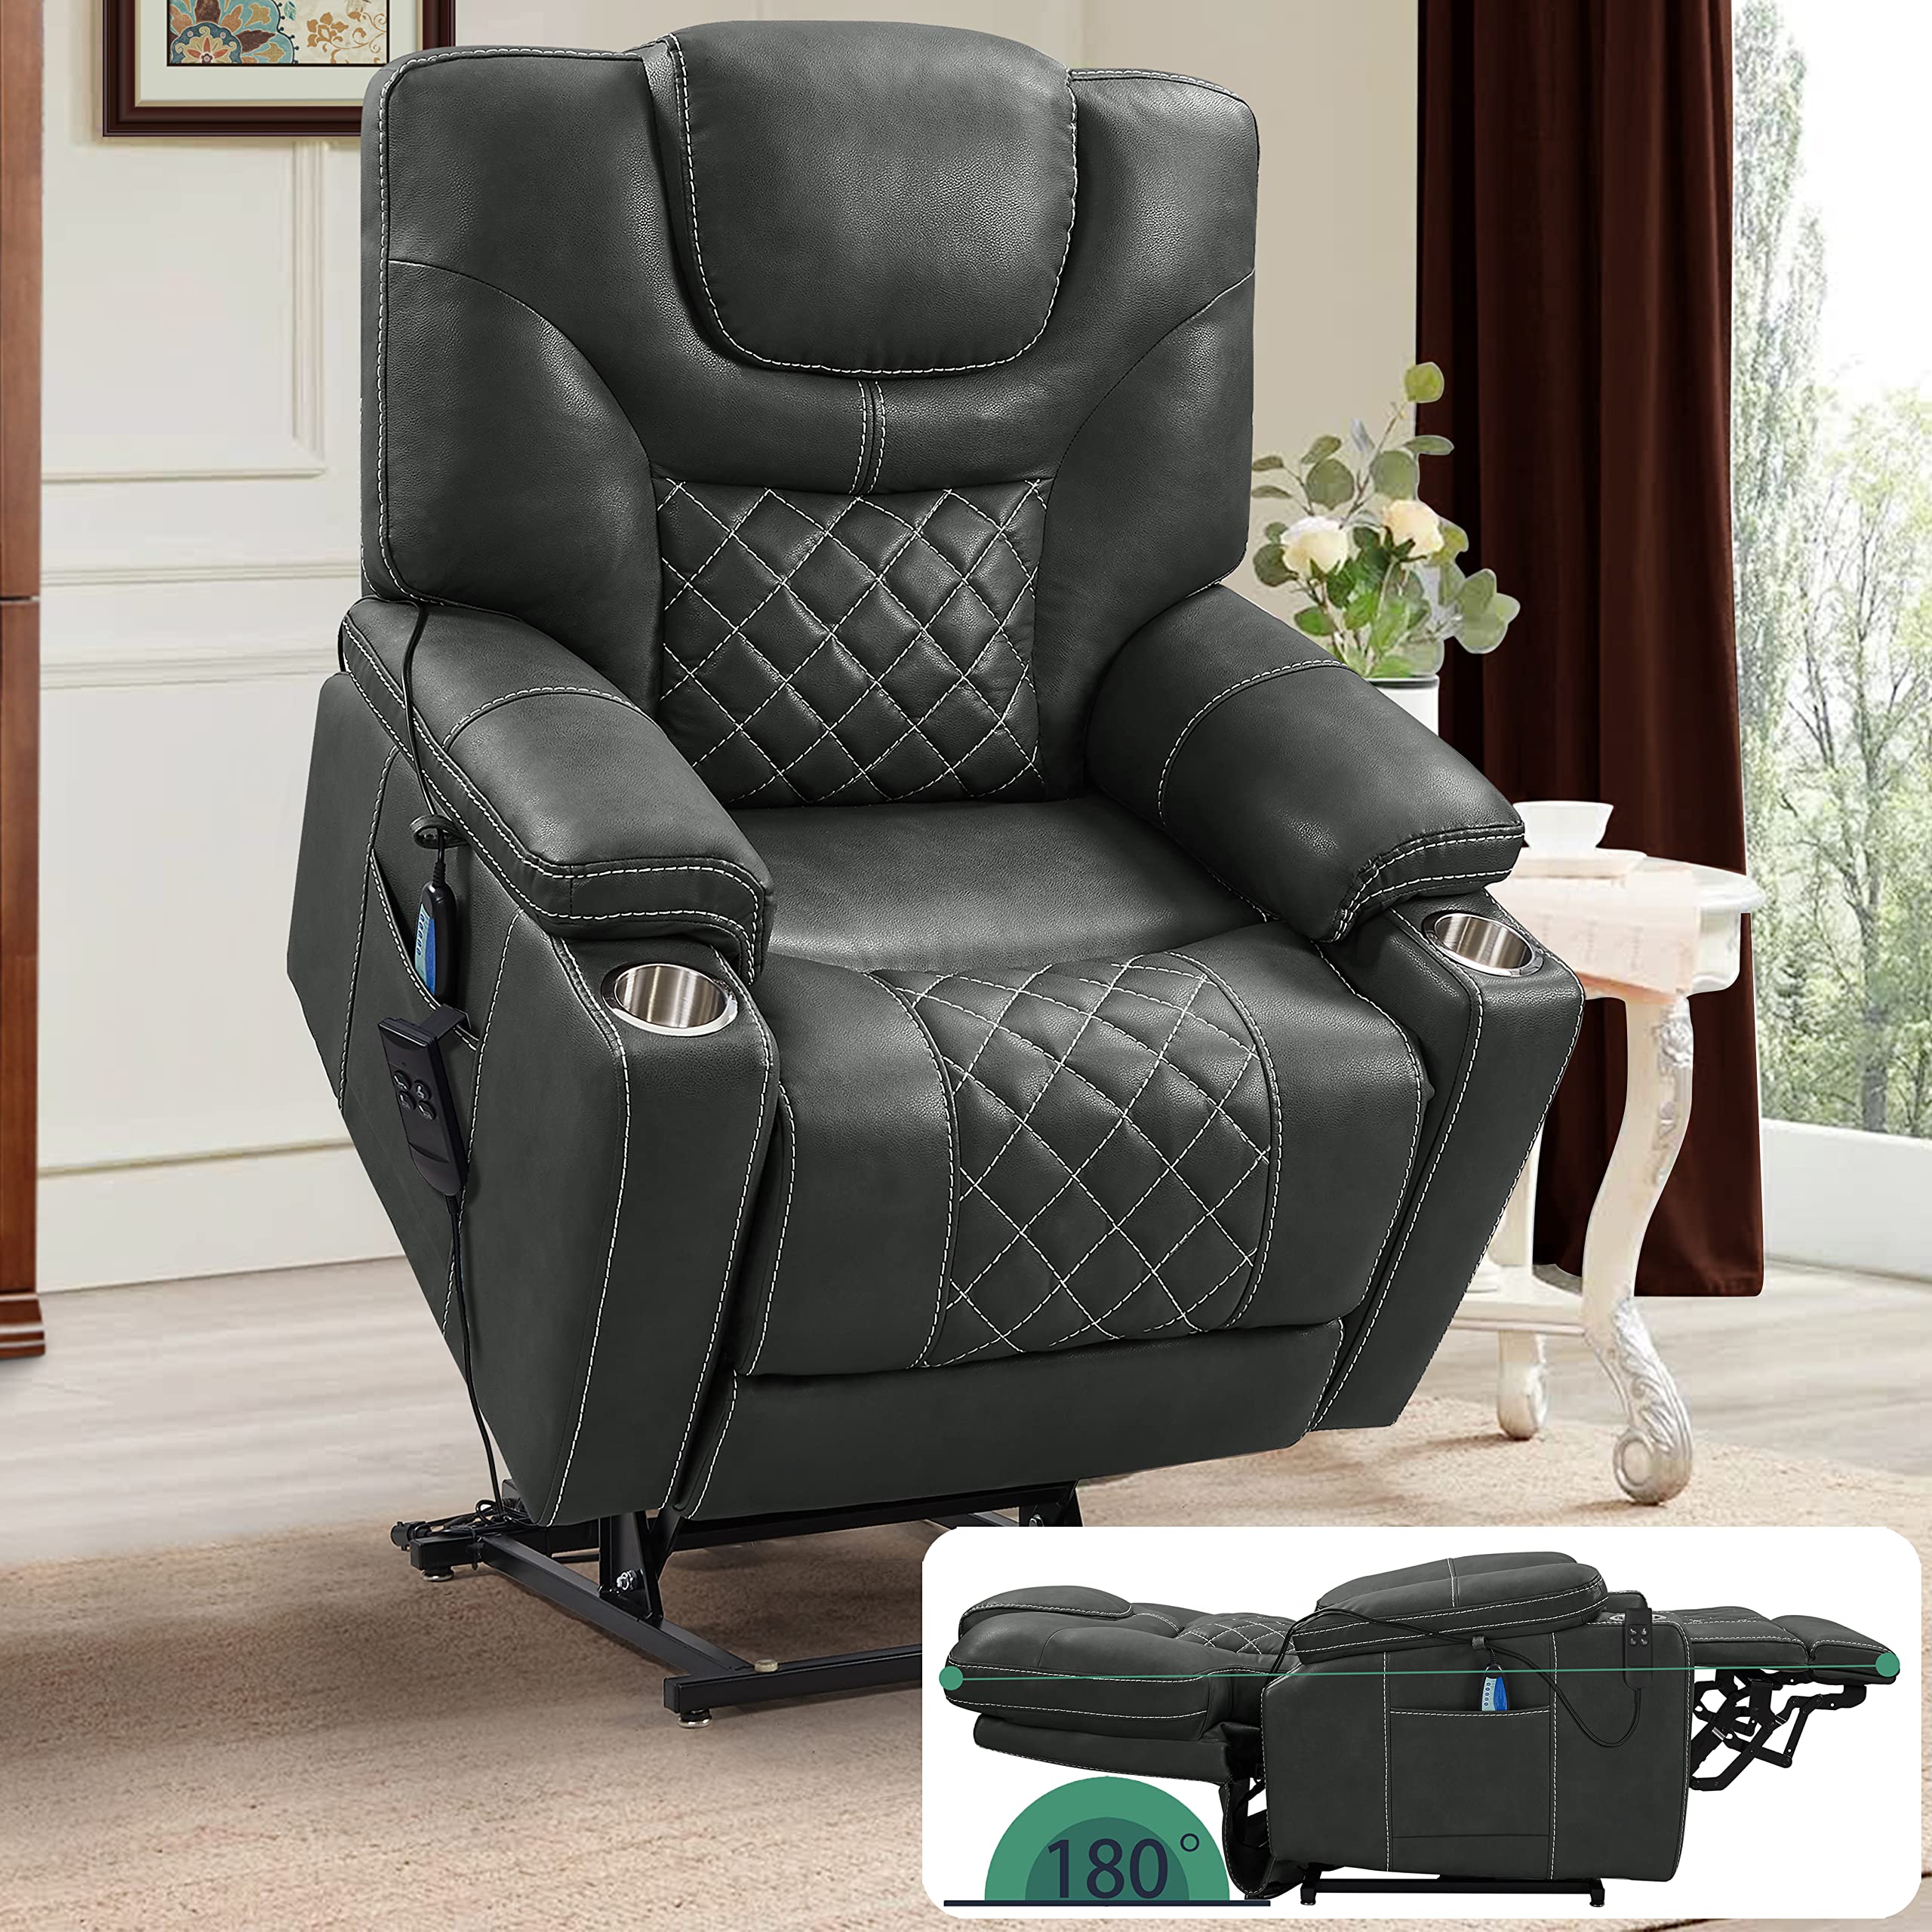 PUG258Y Power Lift Recliner for Seniors: 9988 High Density Foam Lift Chair With Heat and Massage, Reclining To 180, 2 Pockets Cu